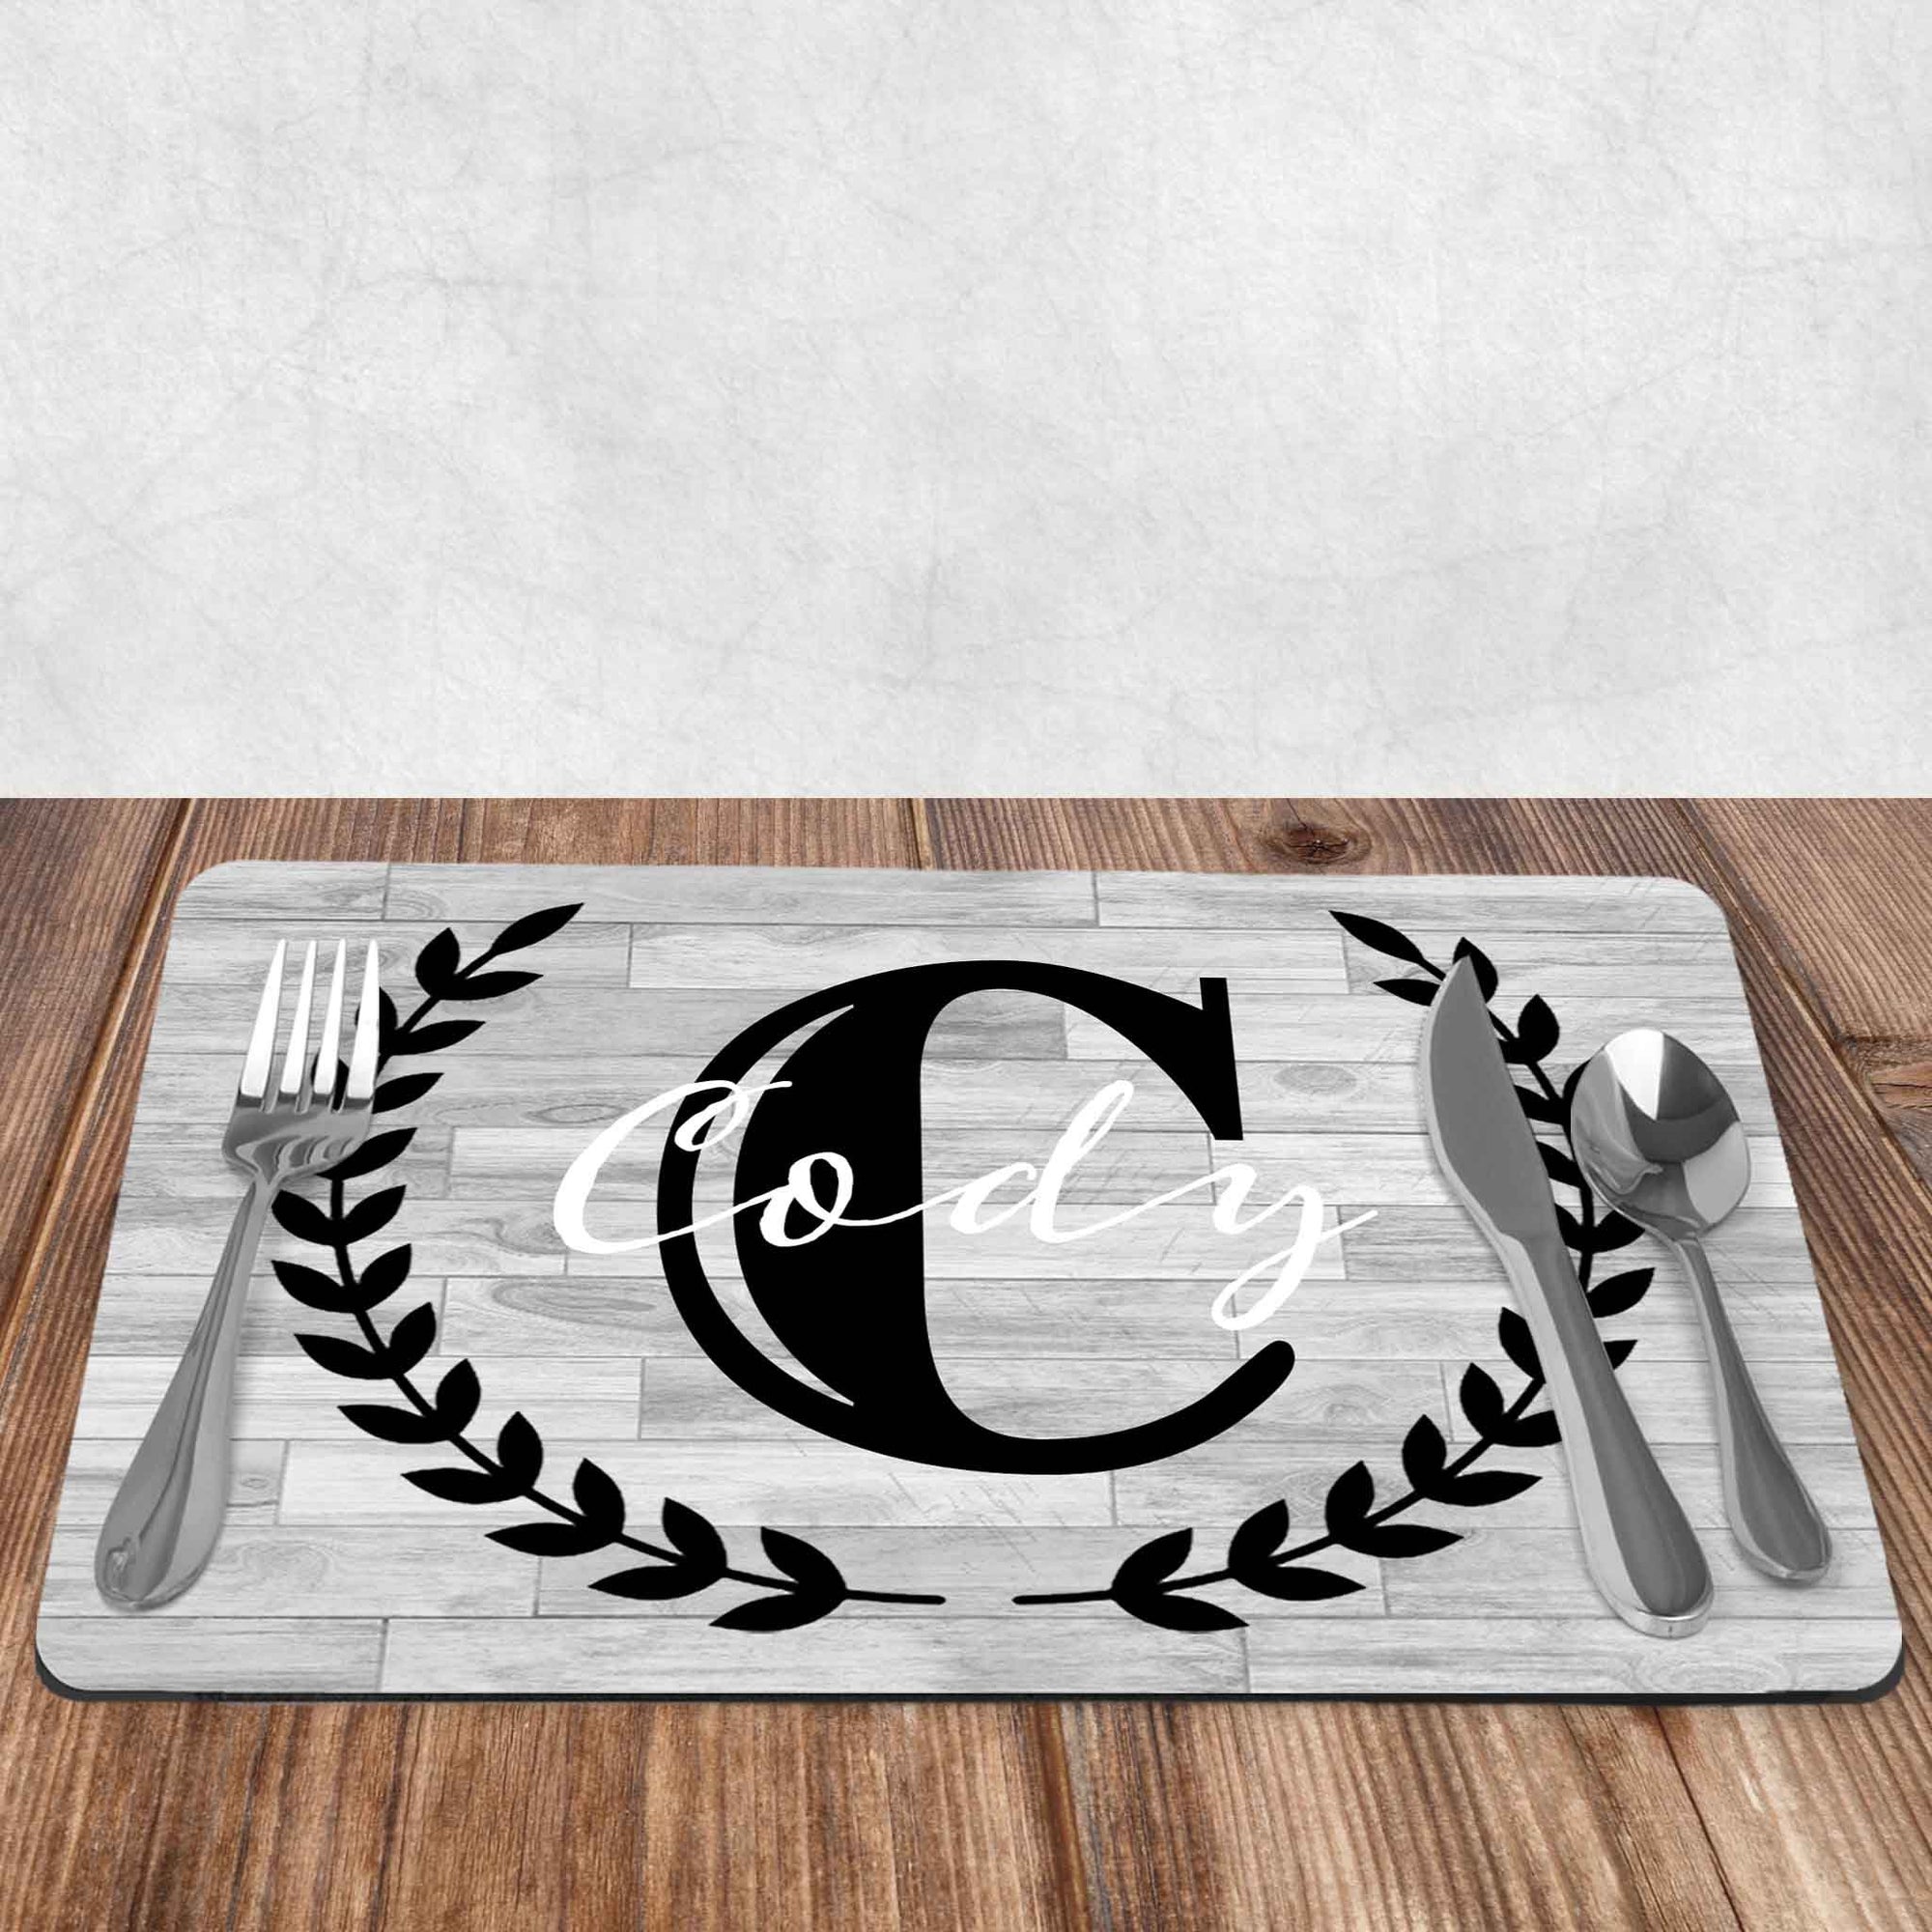 Custom Placemats | Personalized Dining and Serving | Laurel Wreath Ridge